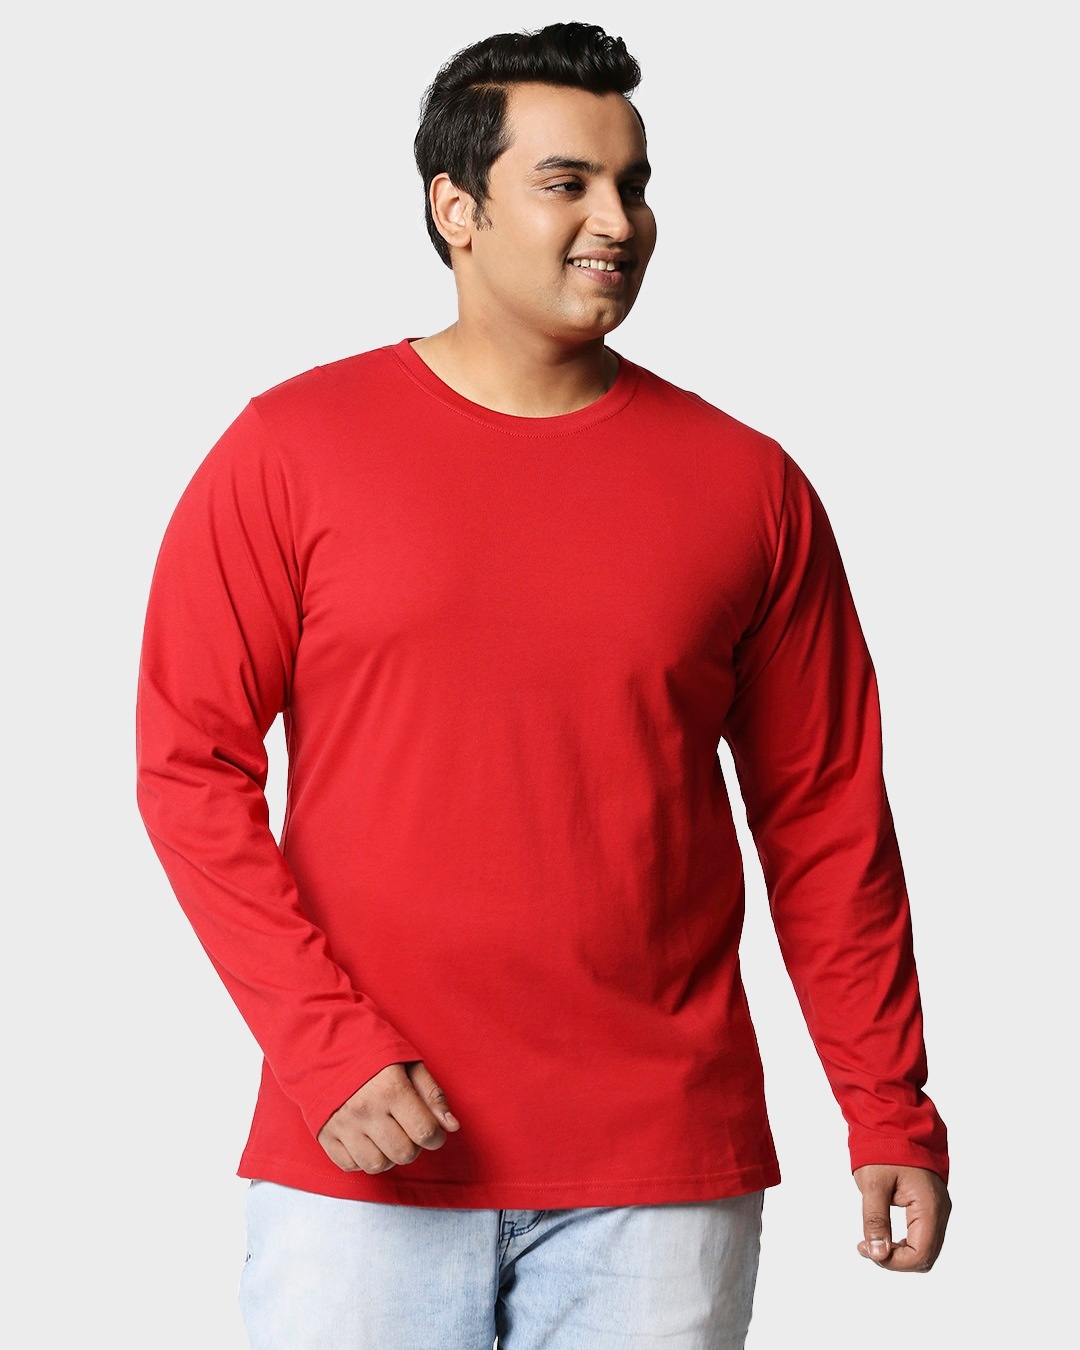 Buy Bold Red Plus Size Full Sleeve T-Shirt Online at Bewakoof